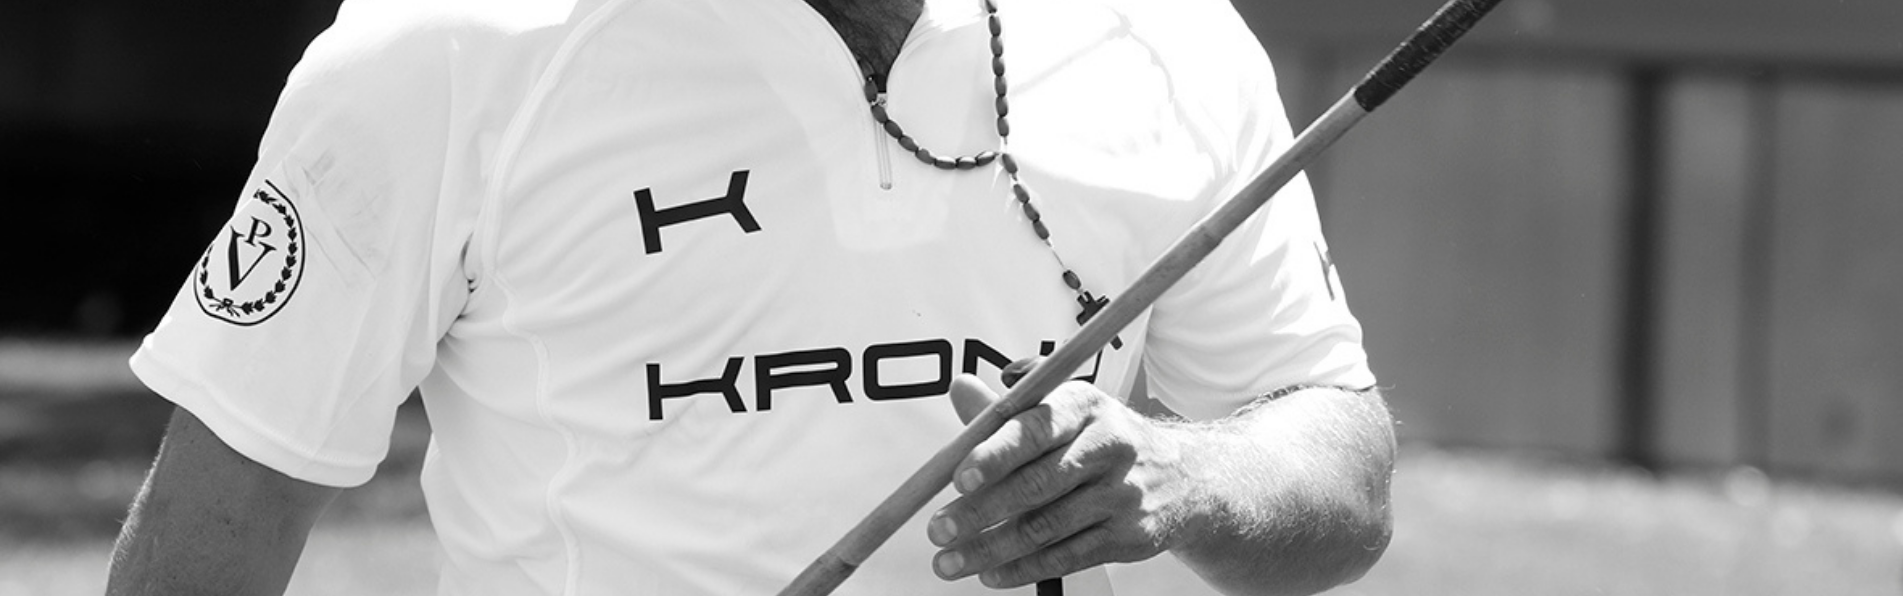 https://www.kronopolo.es/image/cache/catalog/blog/banner%202/polo%20team%20shirts-1903x596.png